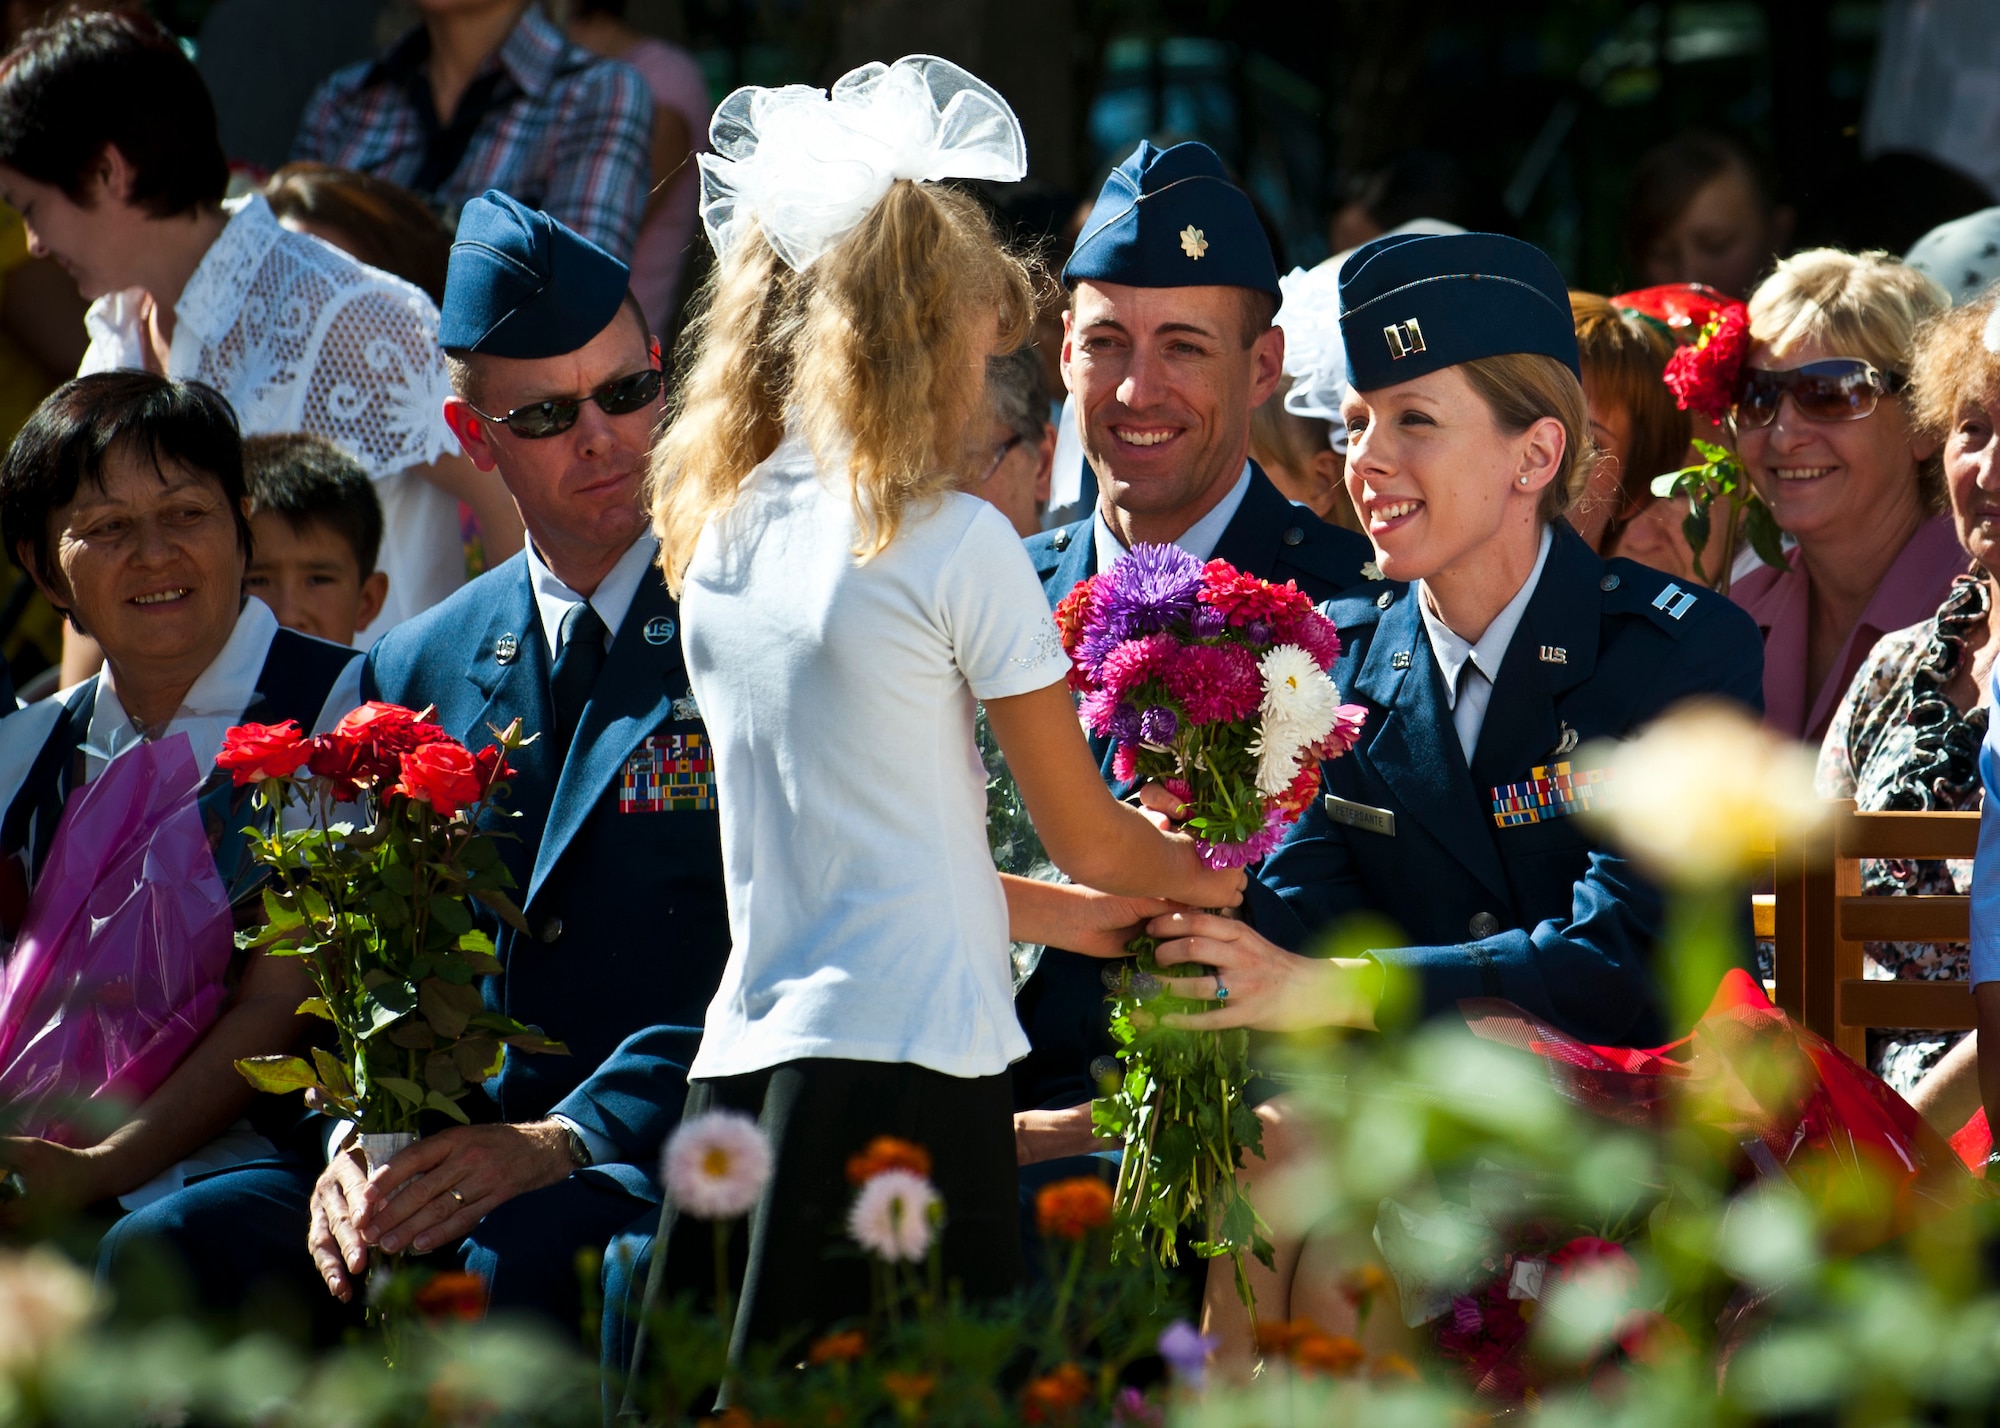 Right, Capt. Martha Petersante receives flowers from a student during a "First Bell" ceremony at the Birdik  School in Bishkek, Kyrgyzstan, Sept. 1, 2012. Flowers were given to teachers and honored guests during the event. (U.S. Air Force photo/Senior Airman Brett Clashman)